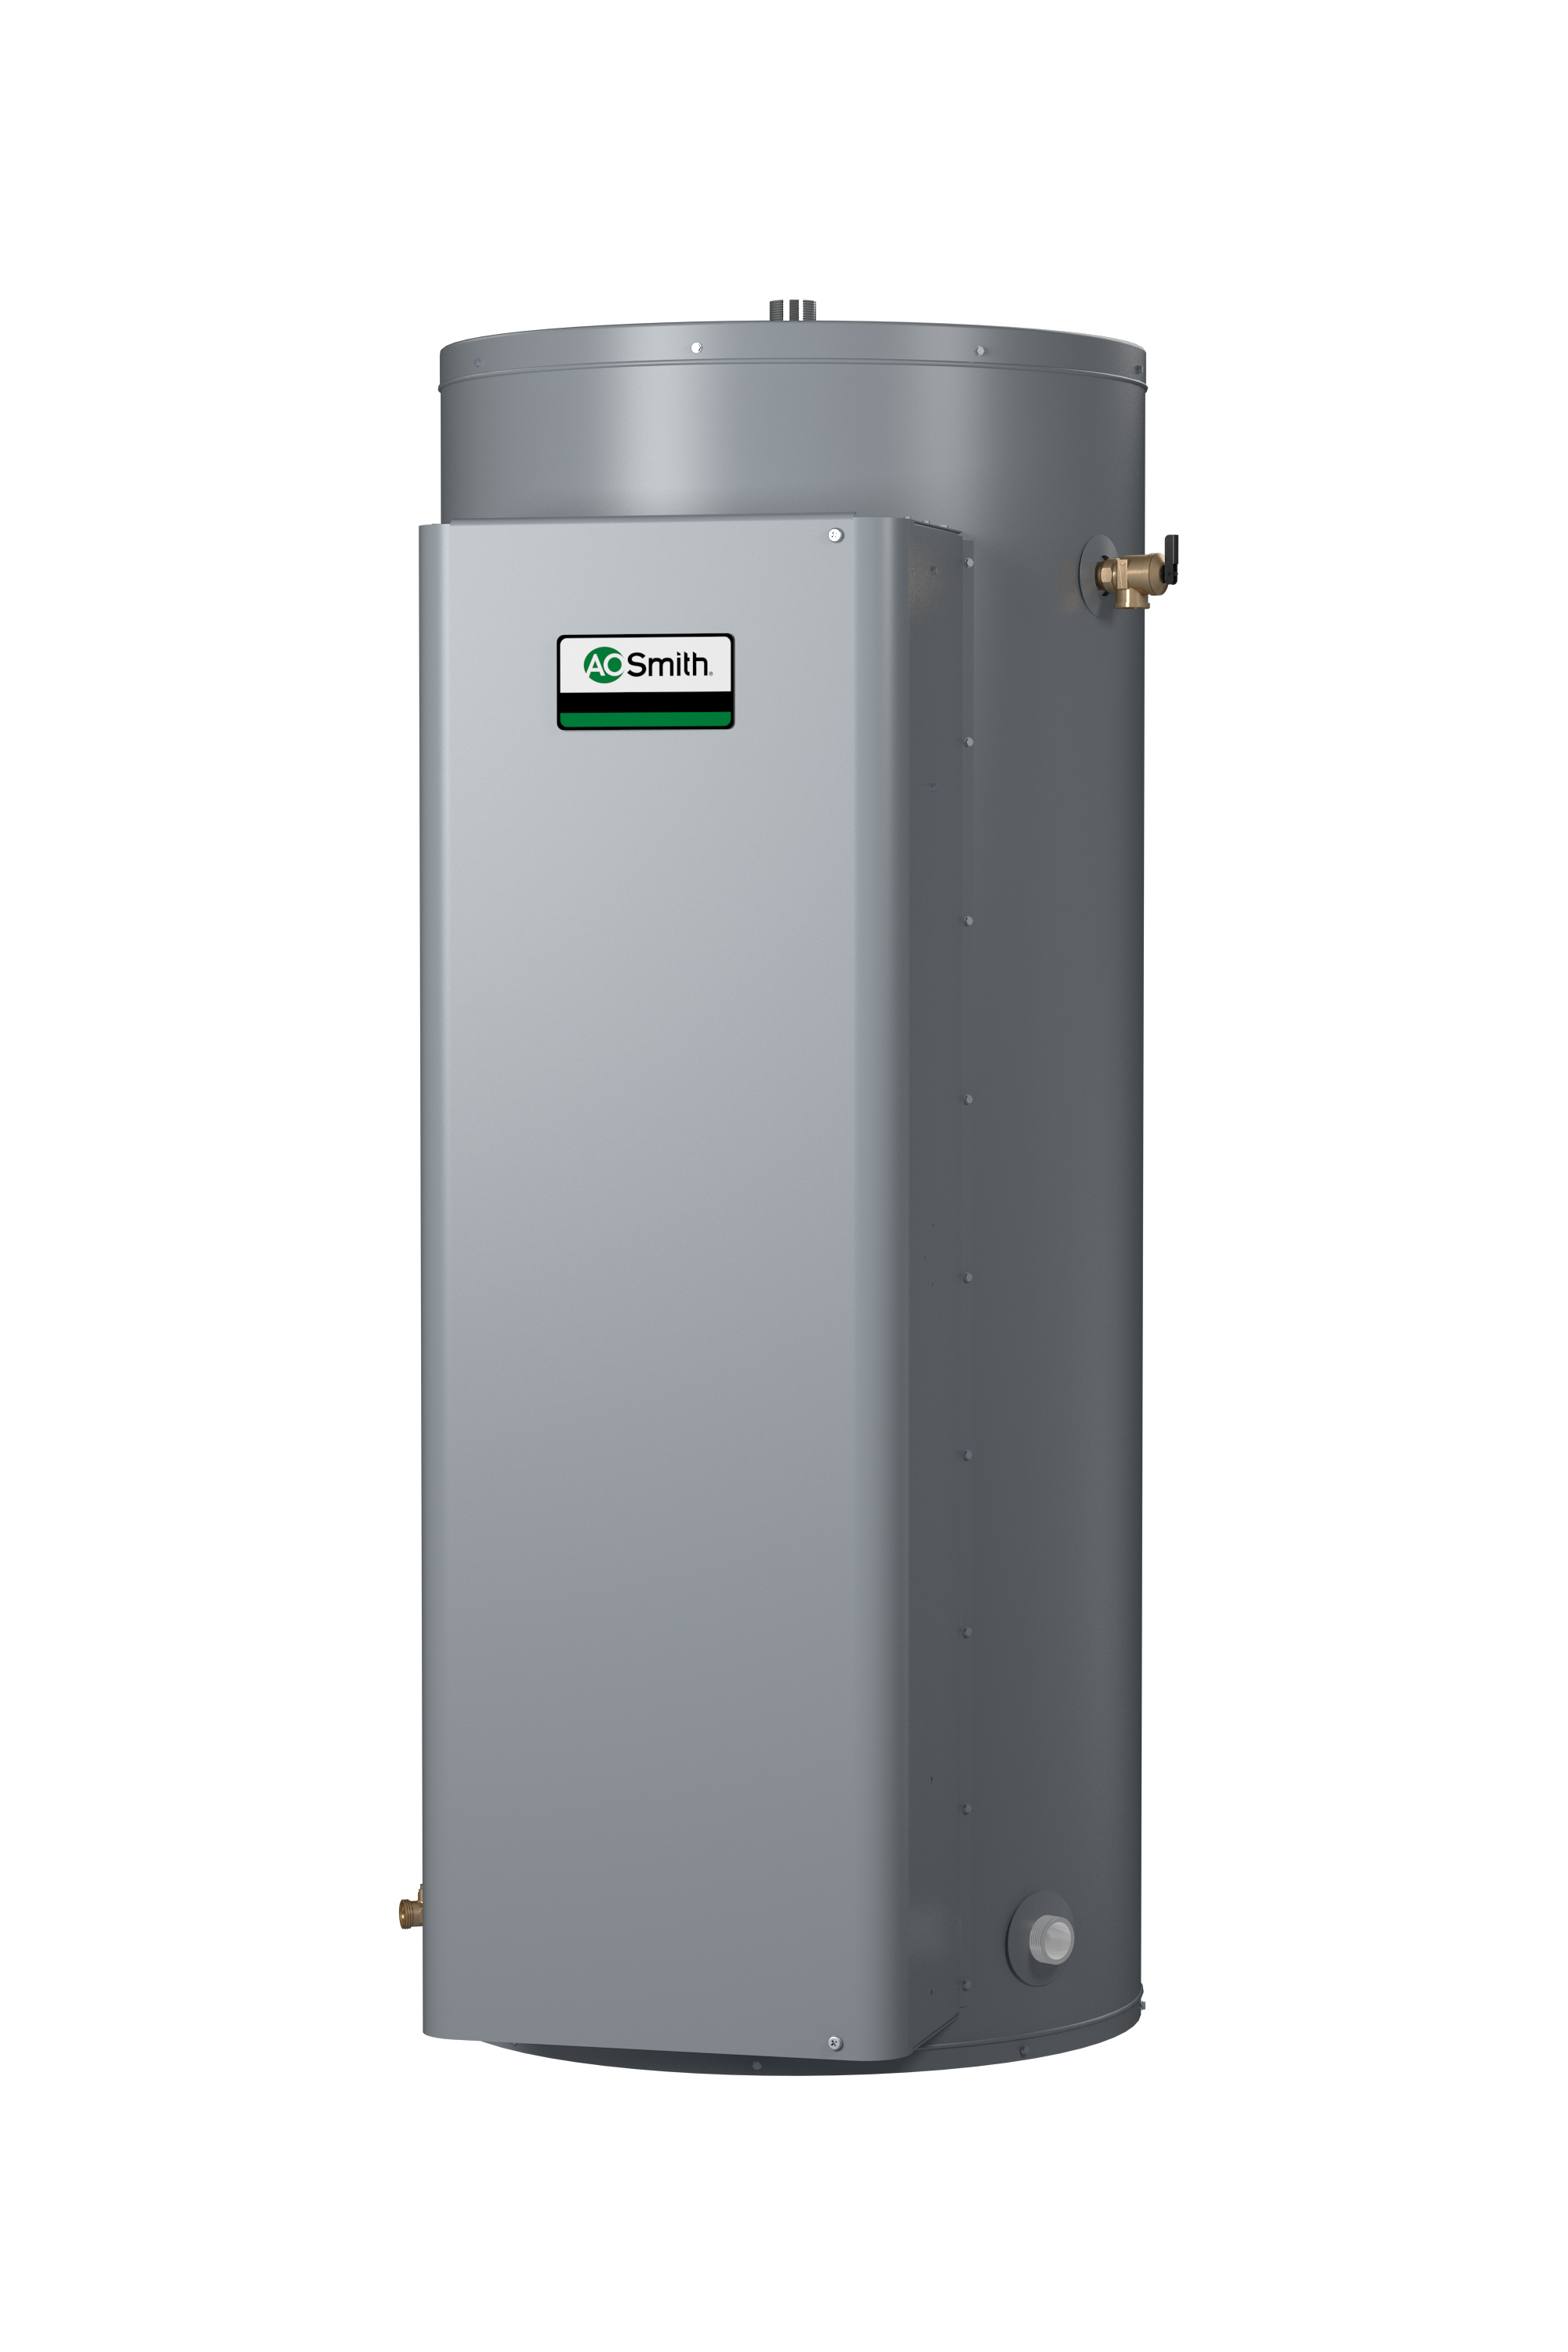 AO SMITH DRE-120-15, 119 GALLON, 15.0KW, 240 VOLT, 36.1 AMPS, 3 PHASE, 3 ELEMENT, COMMERCIAL ELECTRIC WATER HEATER, GOLD SERIES